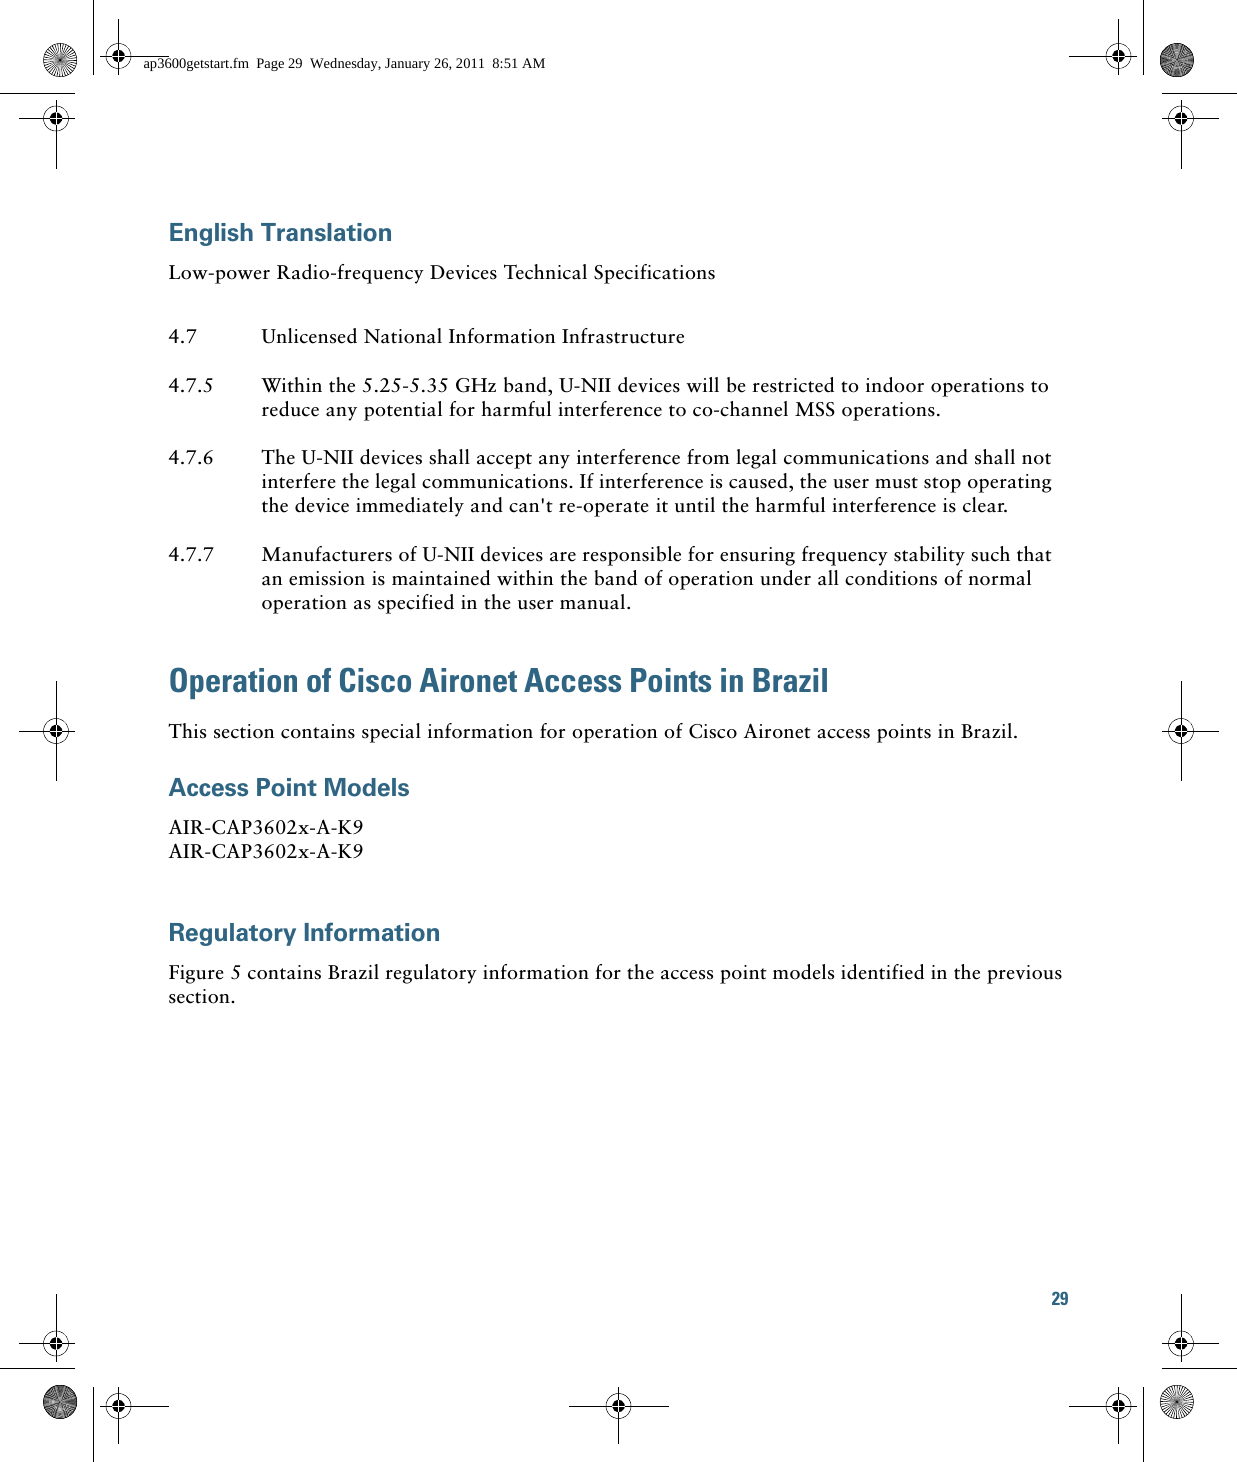 29 English TranslationLow-power Radio-frequency Devices Technical SpecificationsOperation of Cisco Aironet Access Points in BrazilThis section contains special information for operation of Cisco Aironet access points in Brazil.Access Point ModelsAIR-CAP3602x-A-K9 AIR-CAP3602x-A-K9 Regulatory InformationFigure 5 contains Brazil regulatory information for the access point models identified in the previous section.4.7 Unlicensed National Information Infrastructure4.7.5 Within the 5.25-5.35 GHz band, U-NII devices will be restricted to indoor operations to reduce any potential for harmful interference to co-channel MSS operations.4.7.6 The U-NII devices shall accept any interference from legal communications and shall not interfere the legal communications. If interference is caused, the user must stop operating the device immediately and can&apos;t re-operate it until the harmful interference is clear.4.7.7 Manufacturers of U-NII devices are responsible for ensuring frequency stability such that an emission is maintained within the band of operation under all conditions of normal operation as specified in the user manual.ap3600getstart.fm  Page 29  Wednesday, January 26, 2011  8:51 AM